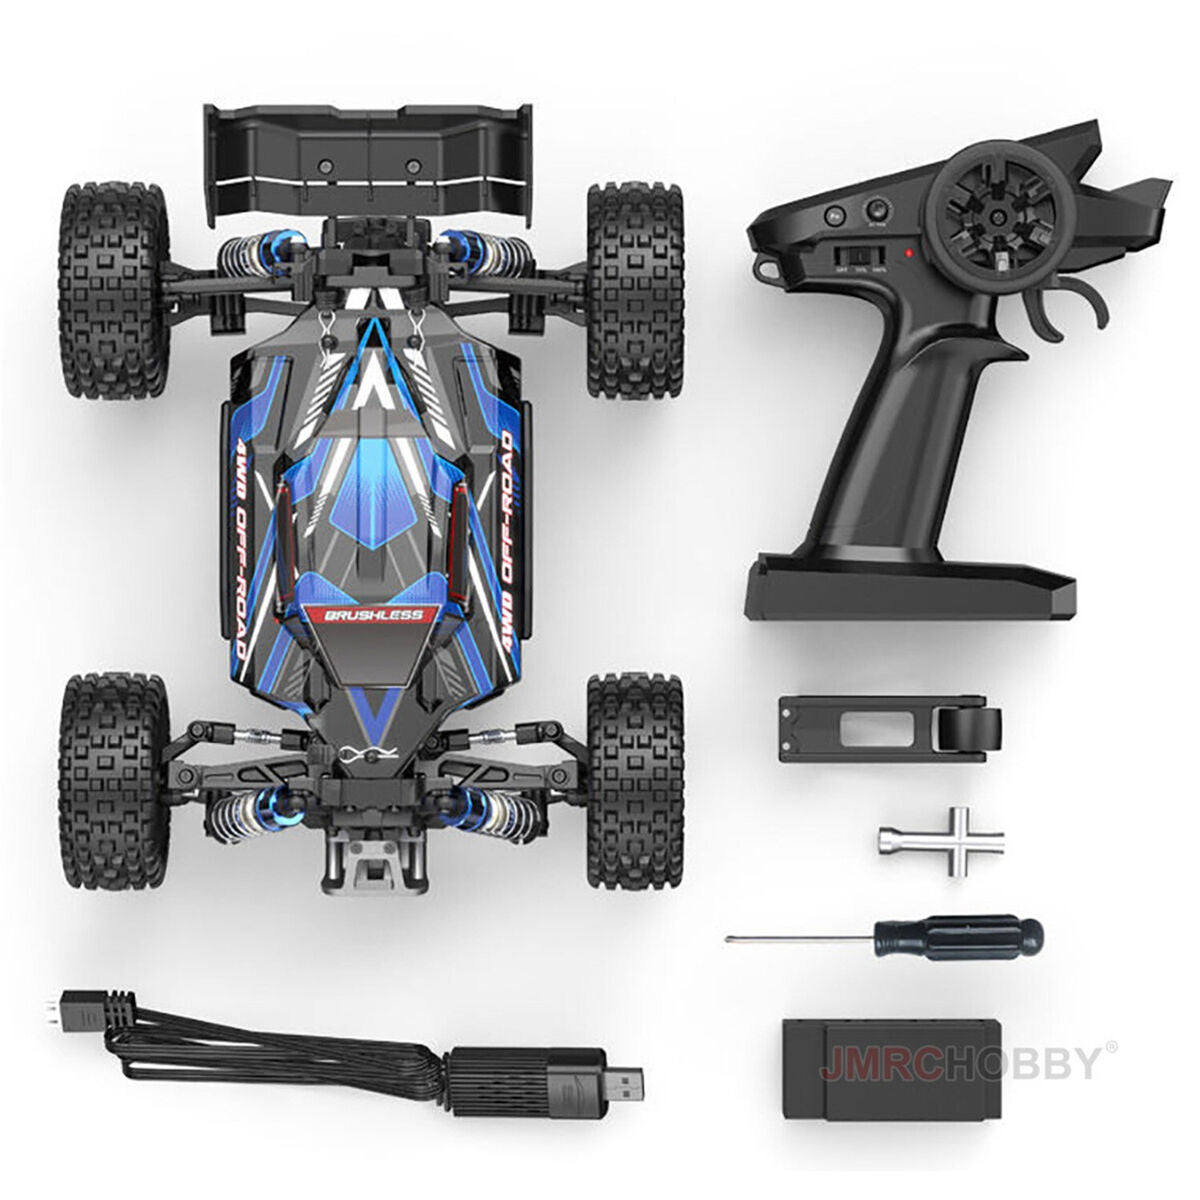 Sleek off-road RC buggy with rugged tires, powerful brushless motor, and remote control for thrilling outdoor adventures.